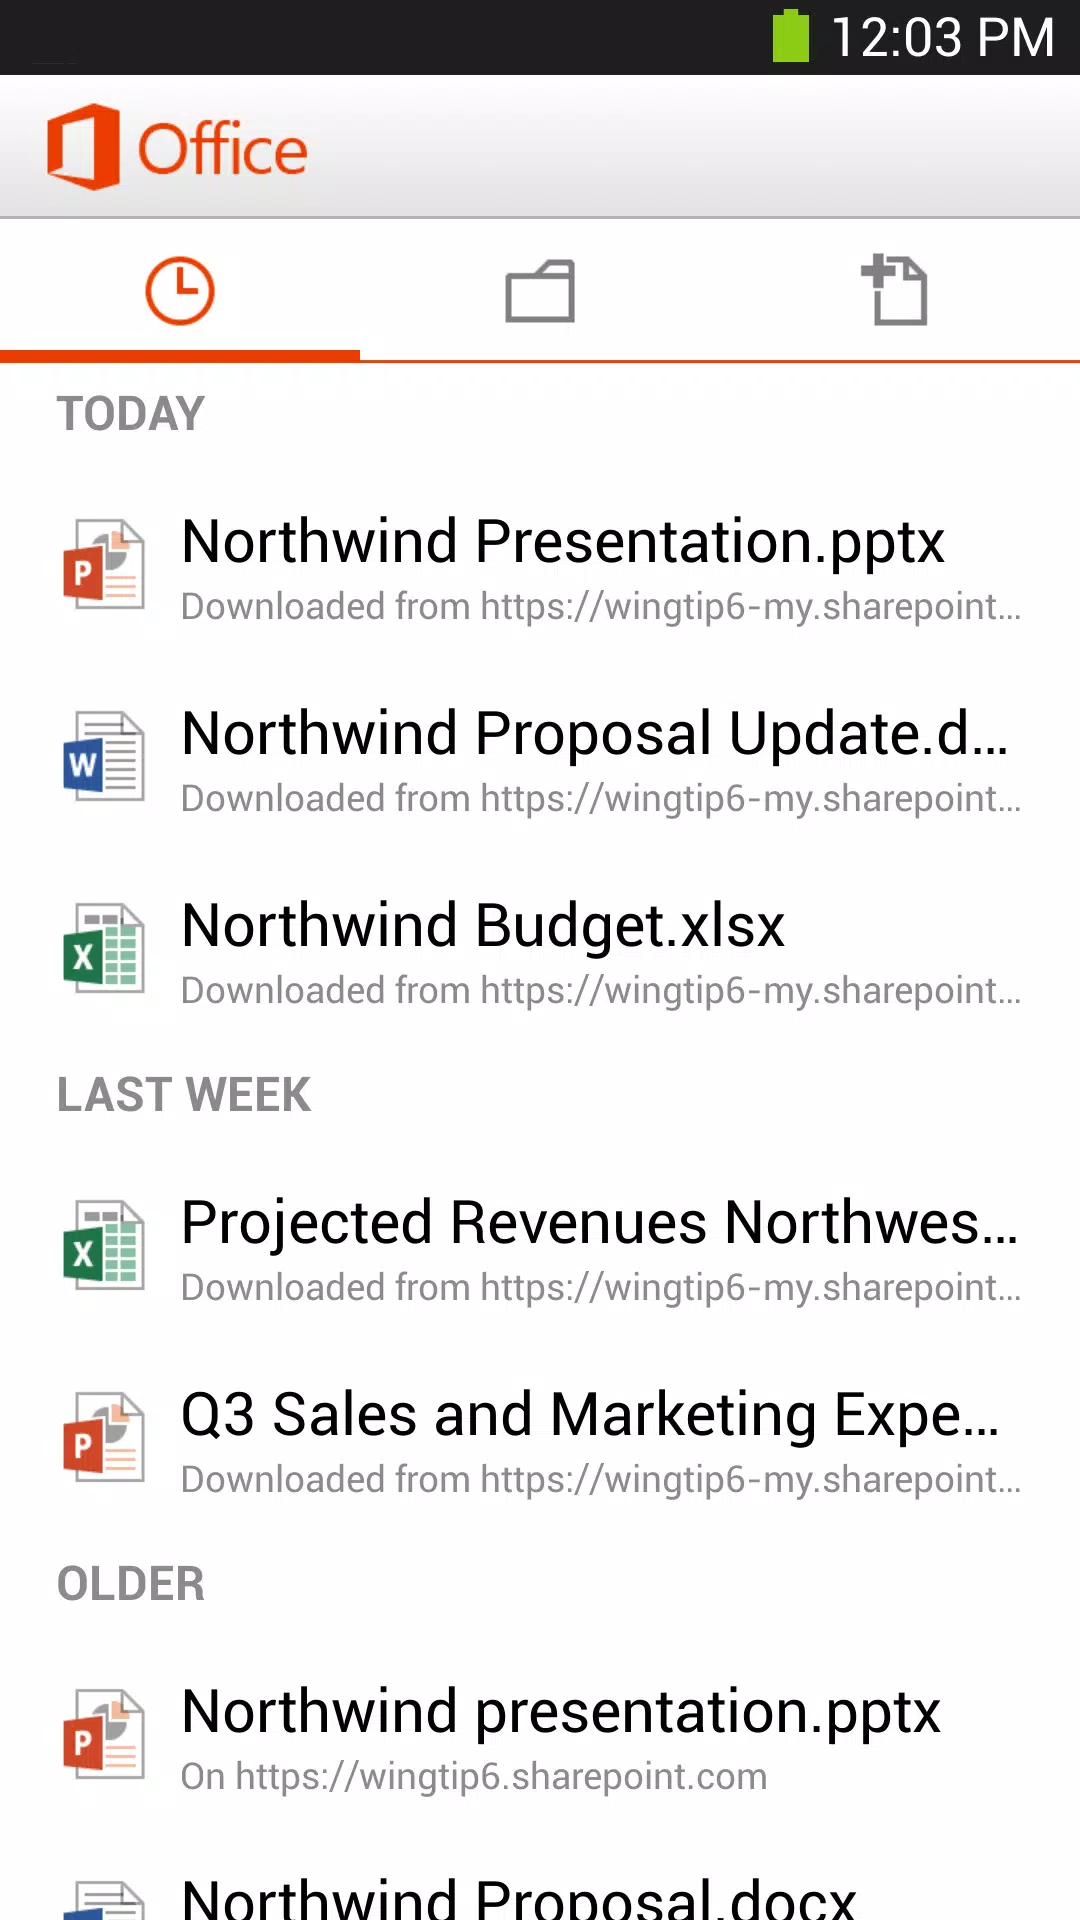 Tải xuống APK Microsoft Office Mobile cho Android